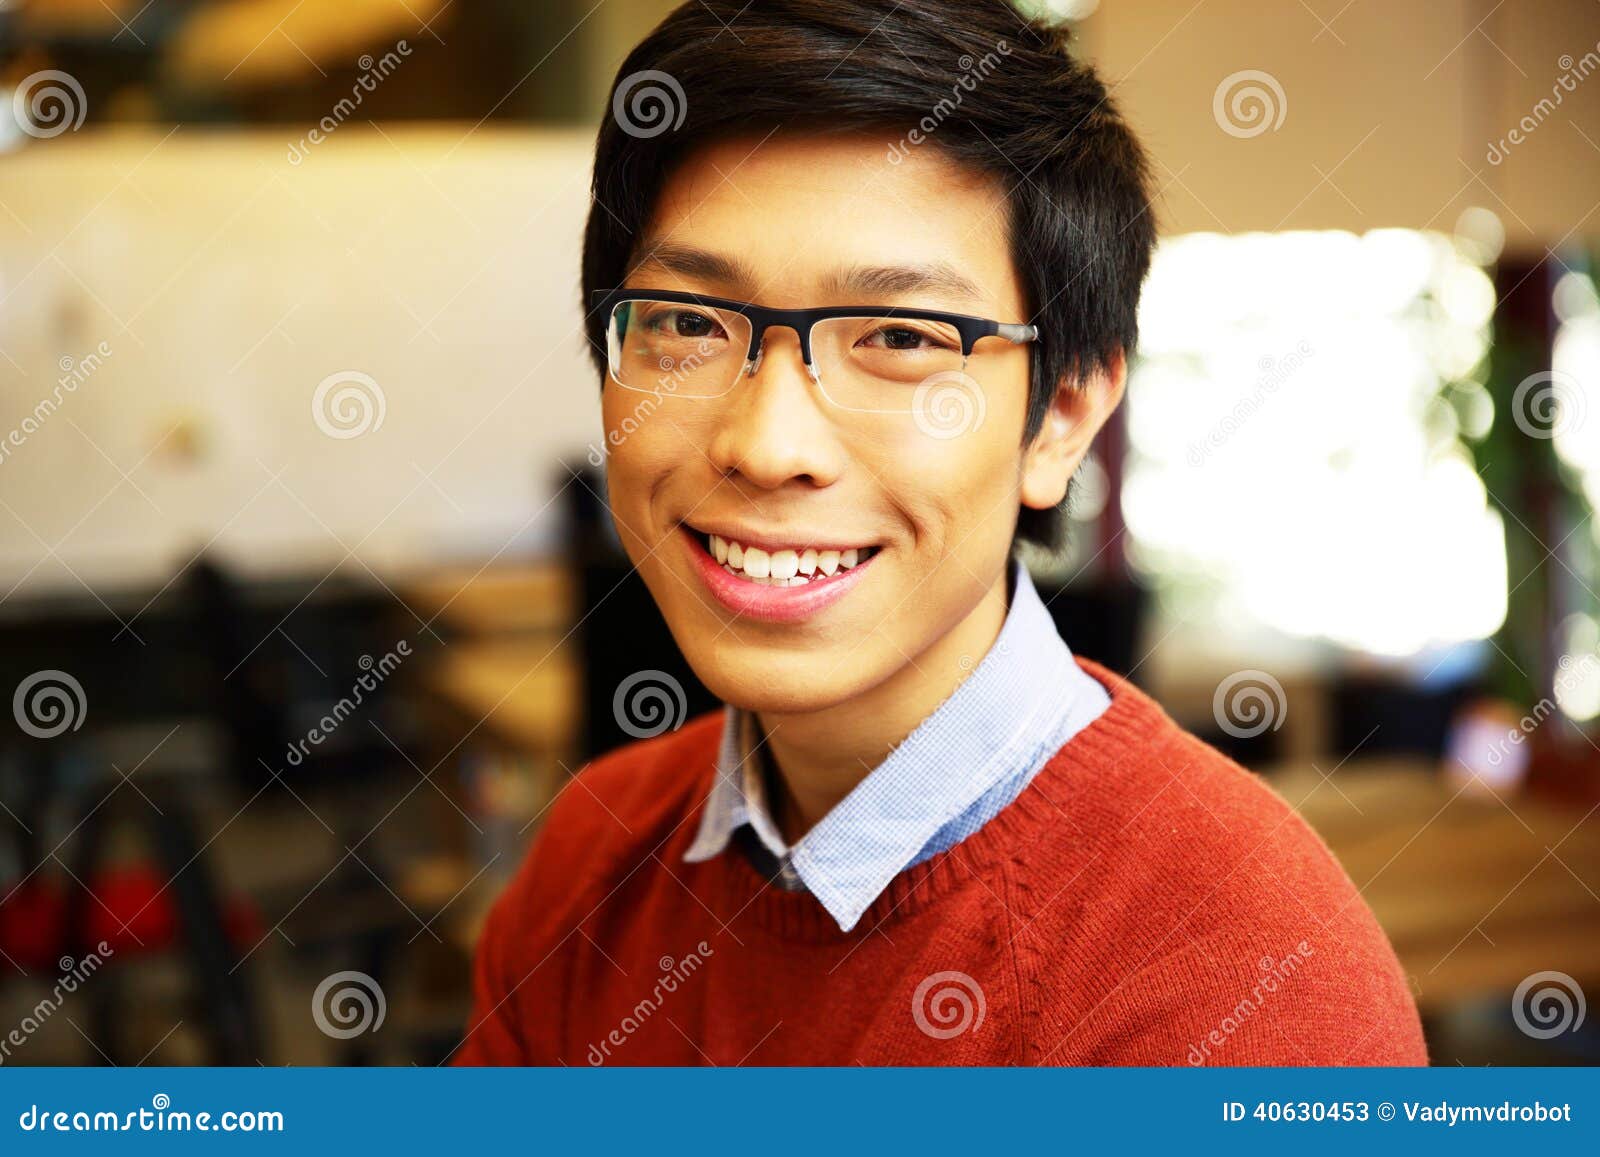 Young Happy Asian Man With Glasses Stock Photo - Image: 406304531300 x 957